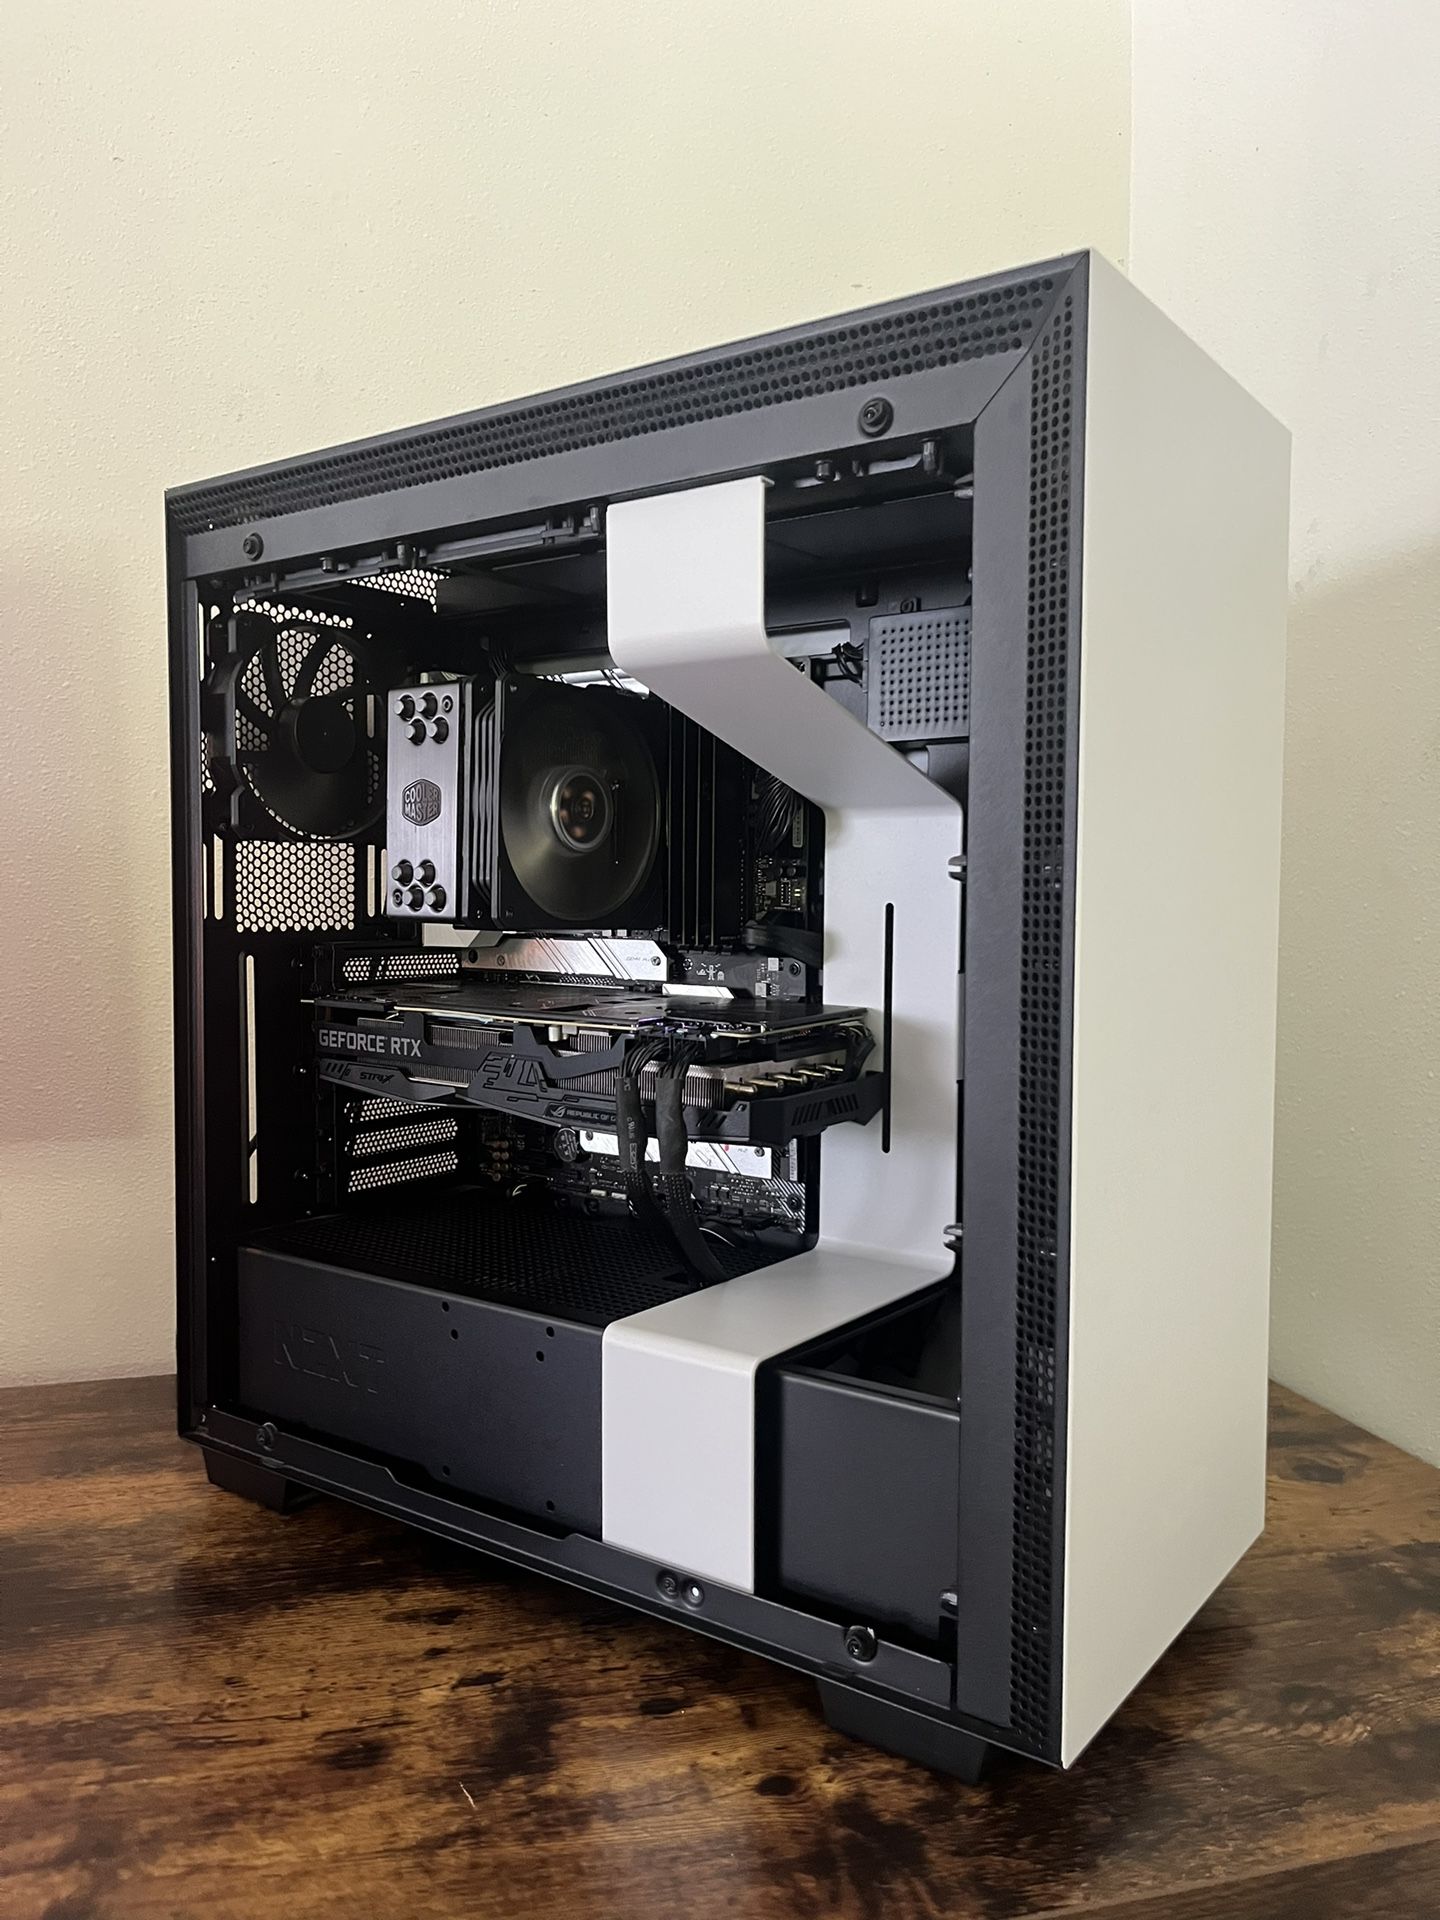 NZXT H700 Intel i7 RTX Gaming PC w/ Monitor & Accessories